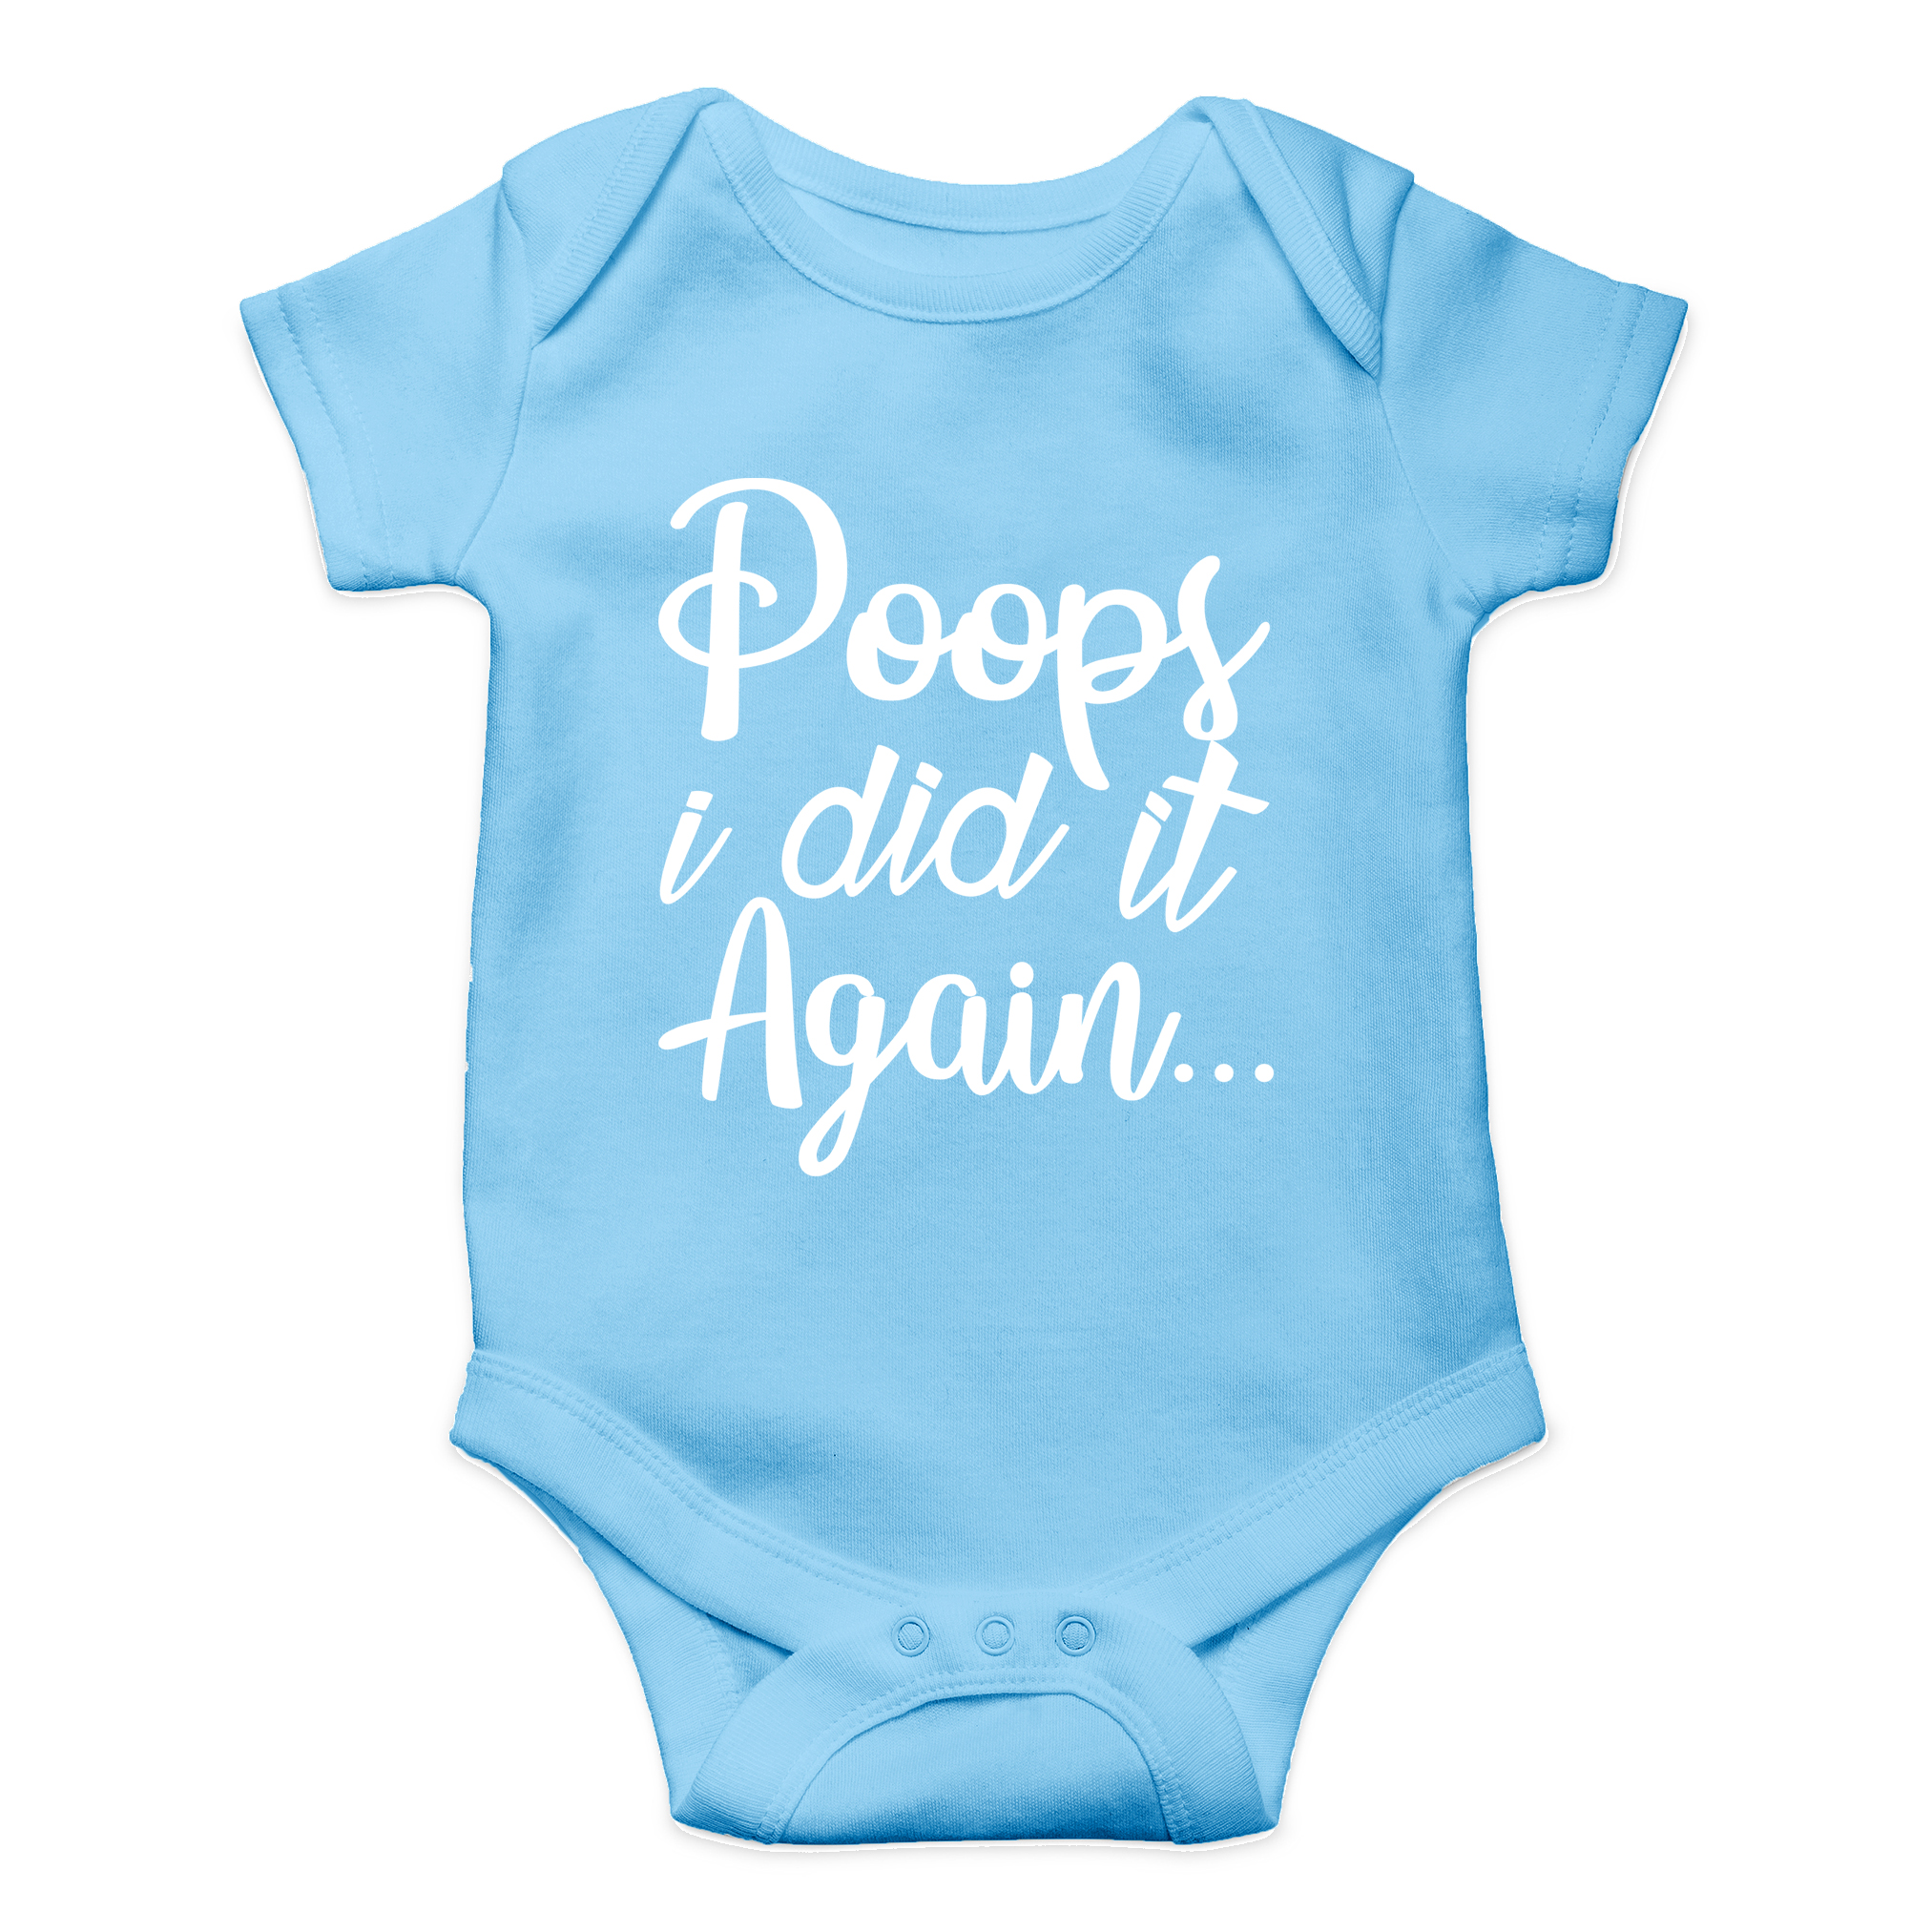 Poops, I Did It Again - Funny Parody Song, Oh Baby, Baby - Cute One-Piece Infant Baby Bodysuit - image 1 of 4